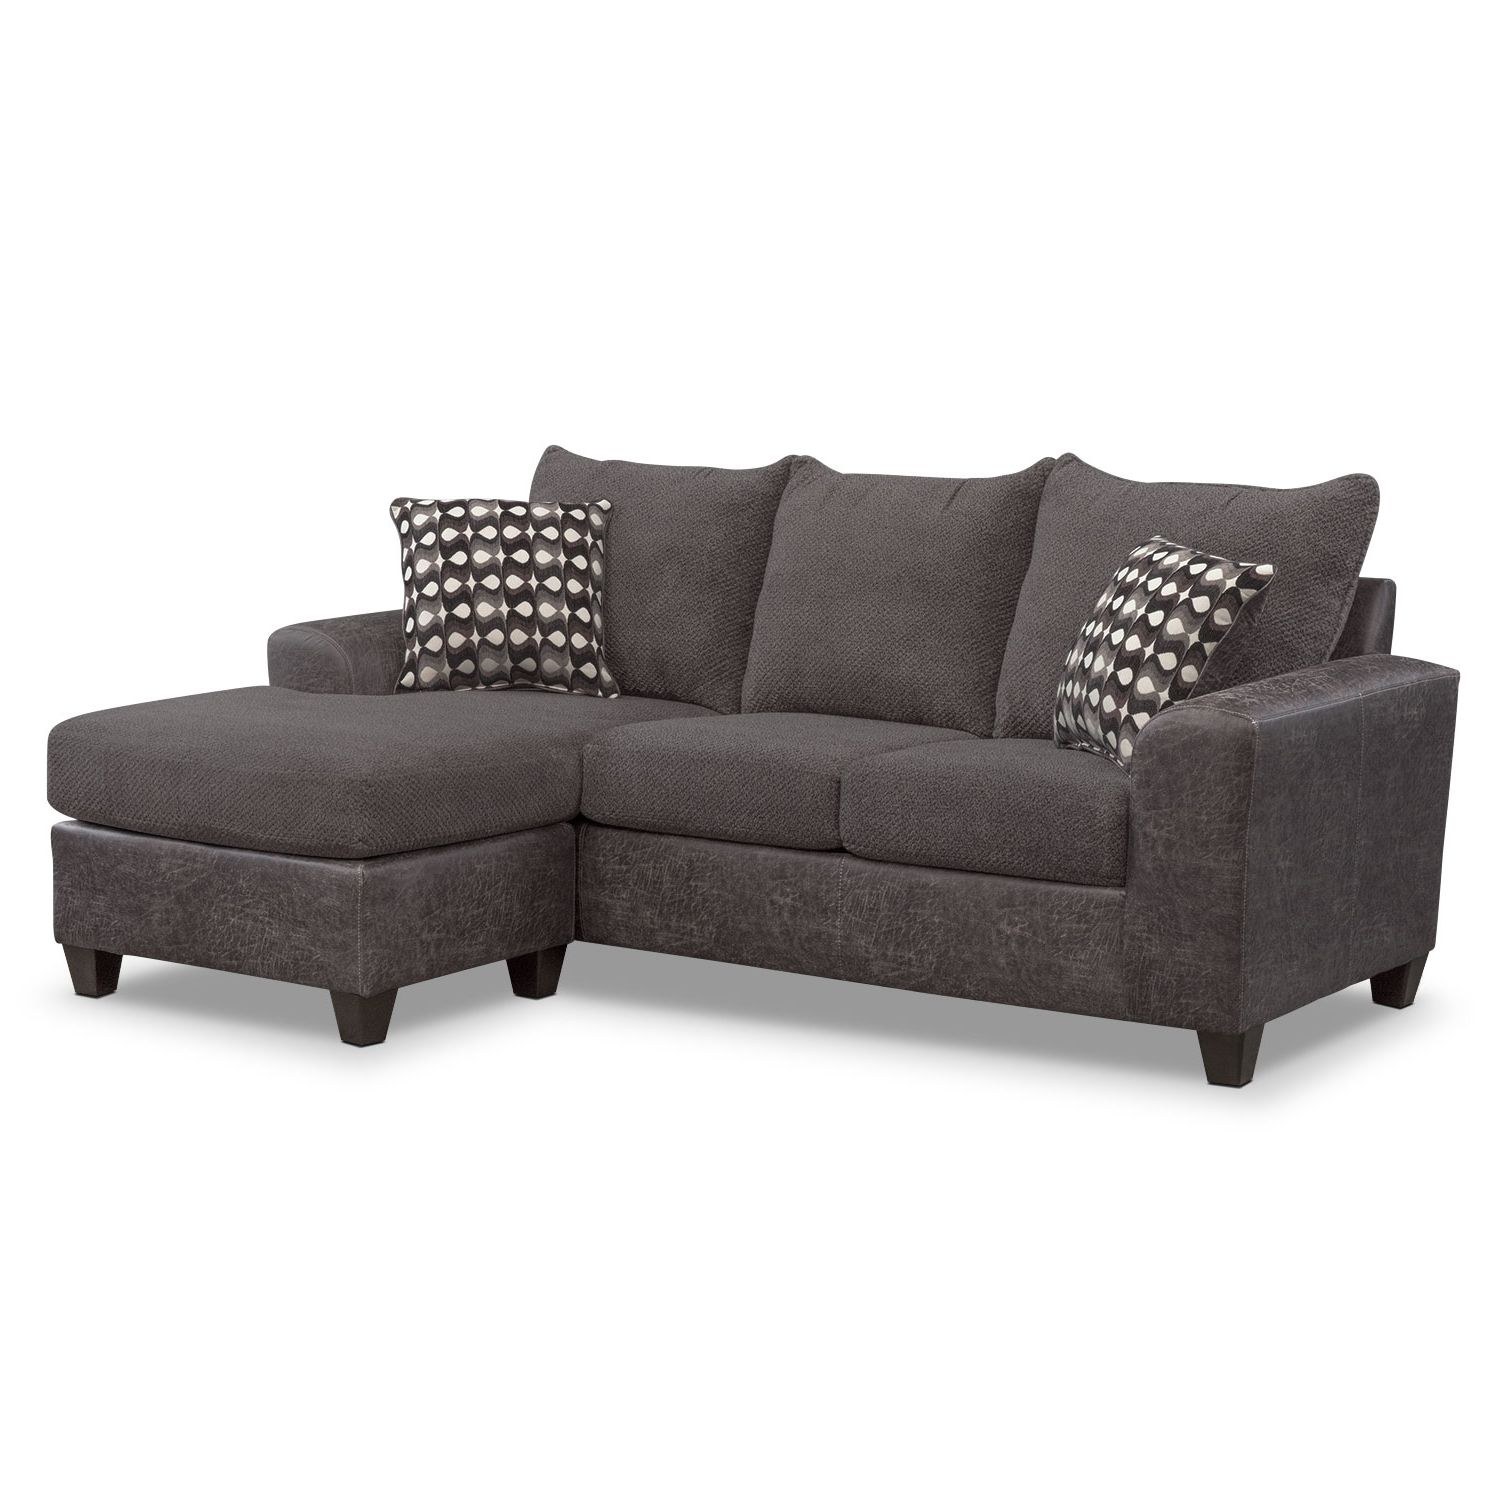 Latest Couches With Chaise Regarding Brando Sofa With Chaise – Smoke (View 3 of 15)